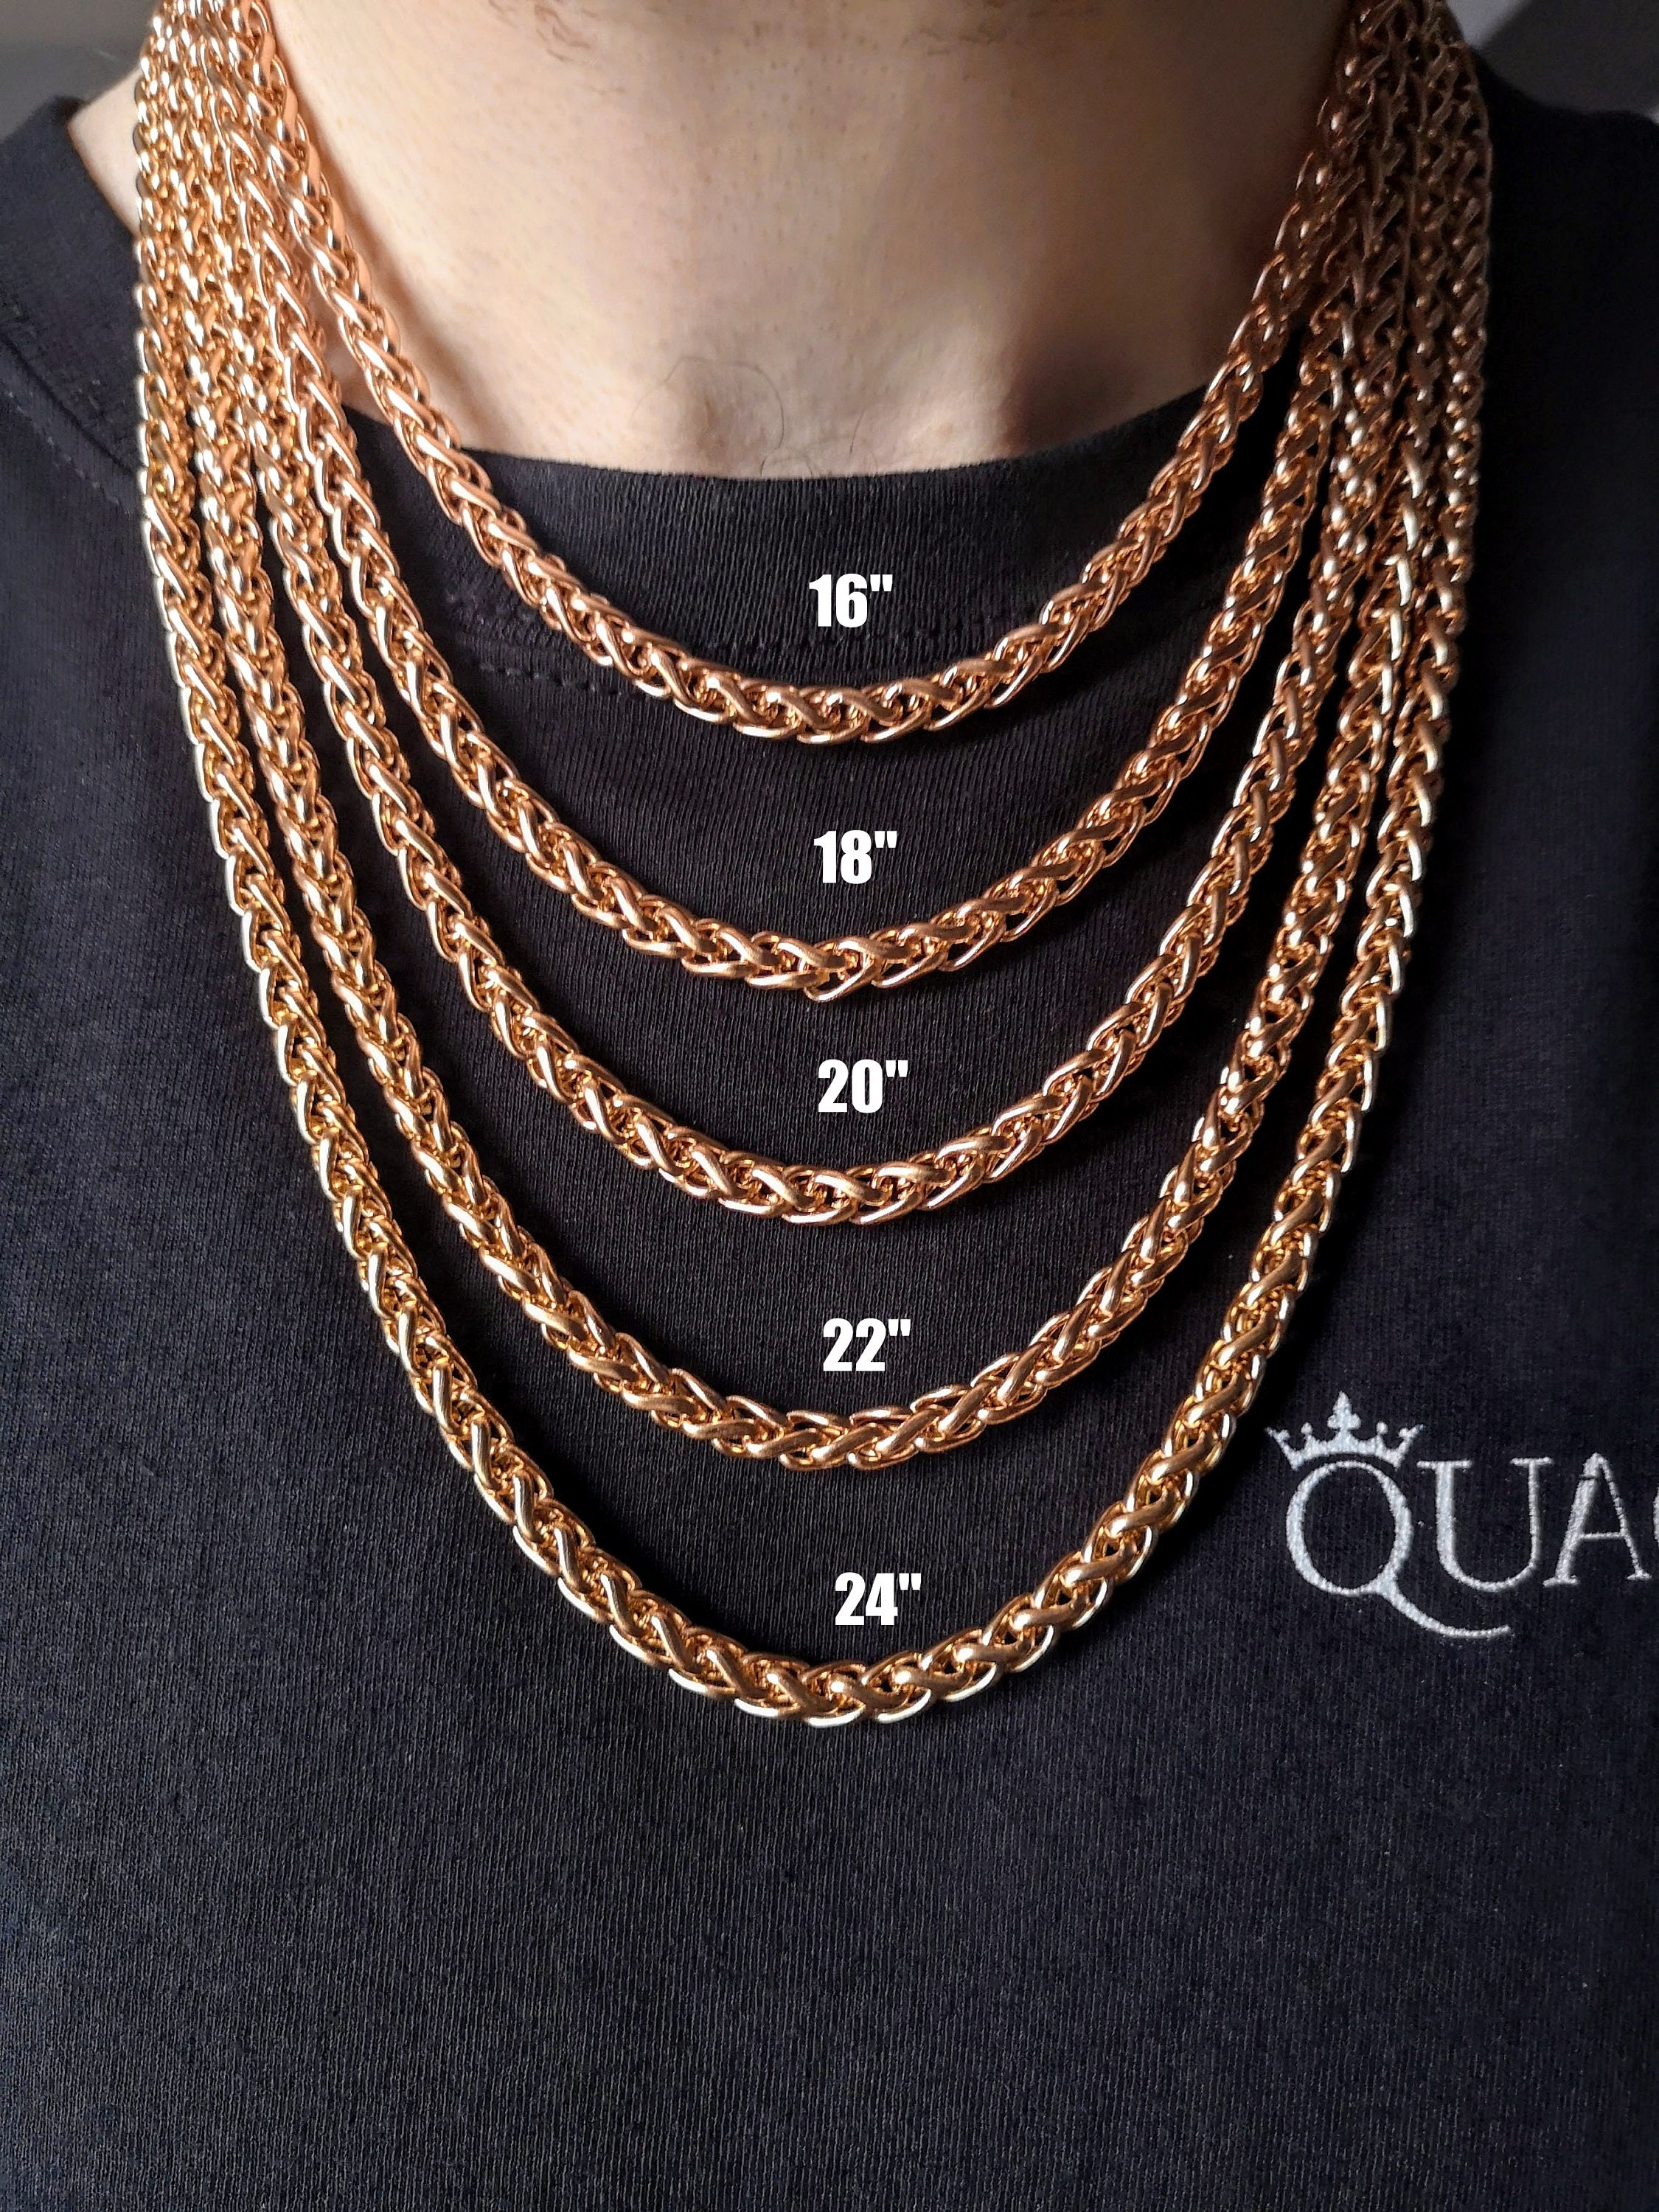 6MM 18K Rose Gold Wheat Chain Necklace Stainless Steel - Etsy